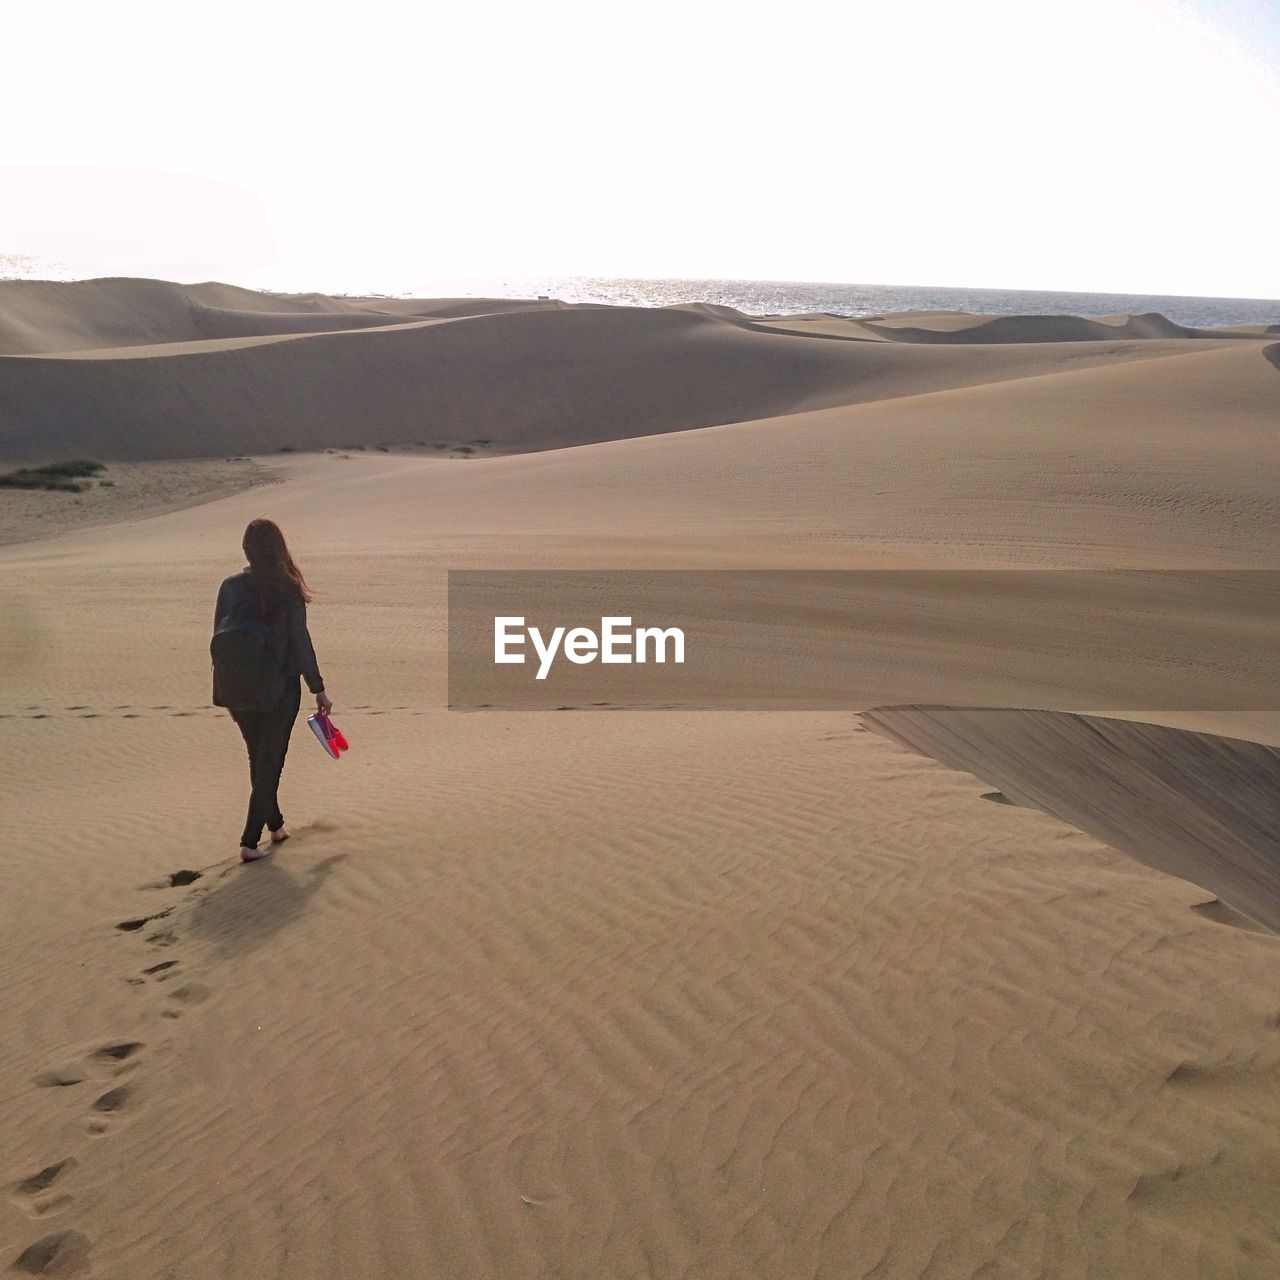 REAR VIEW OF PERSON WALKING ON SAND DUNE